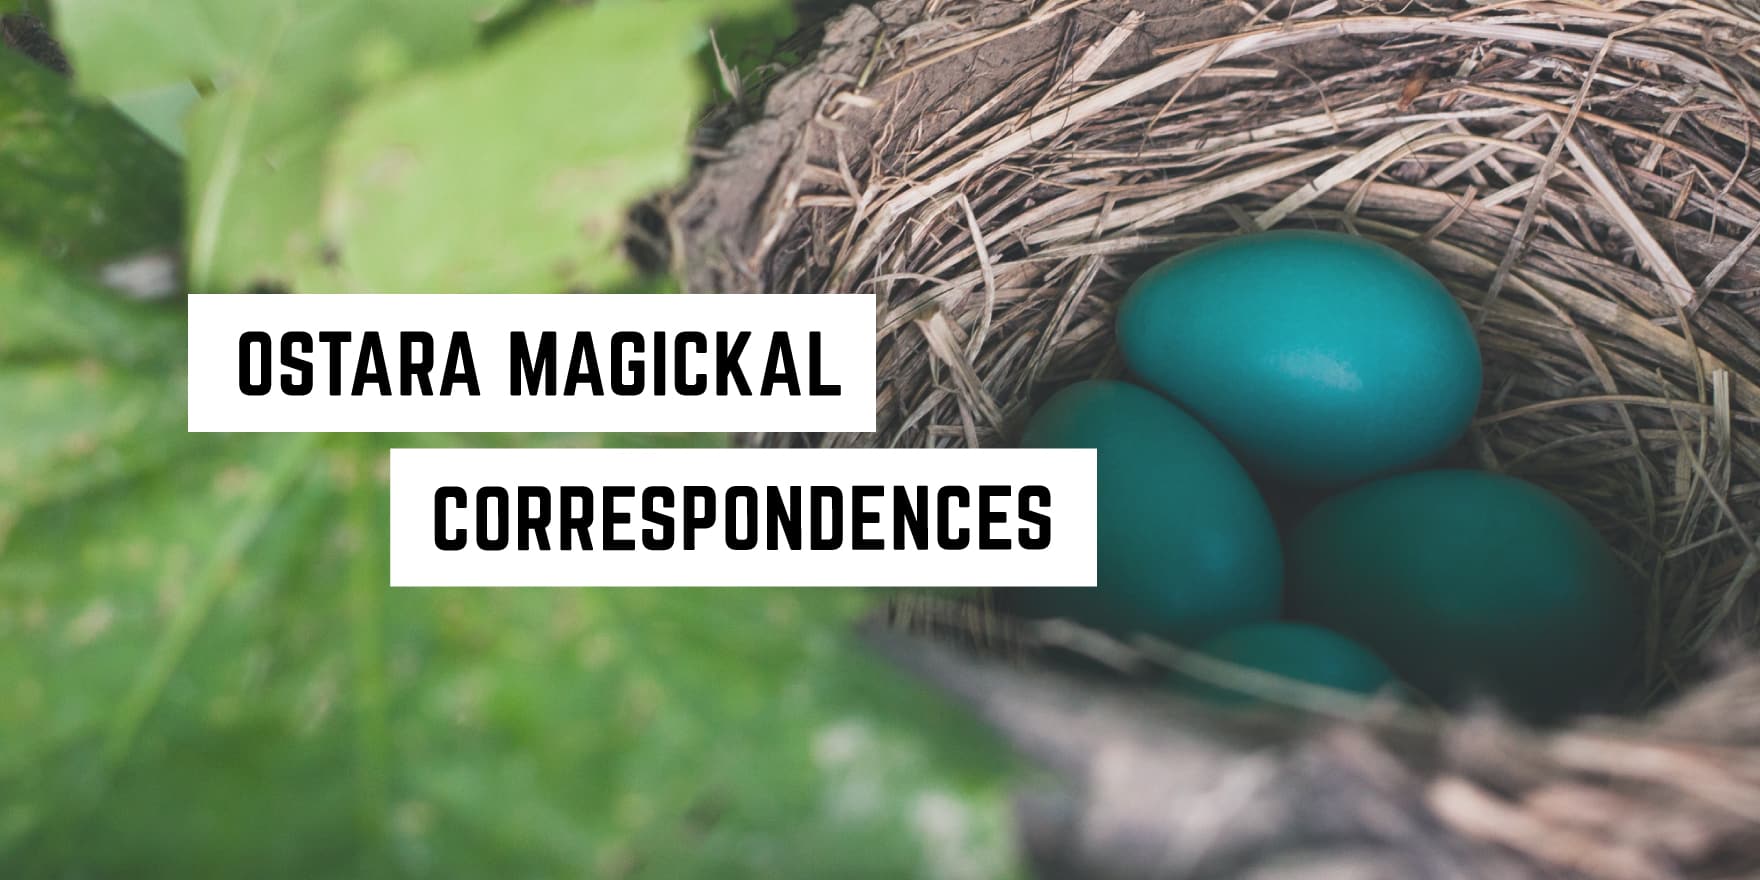 Three vibrant blue eggs nestled in a natural bird's nest among green foliage, with the caption "Ostara metaphysical correspondences" overlaying the image.